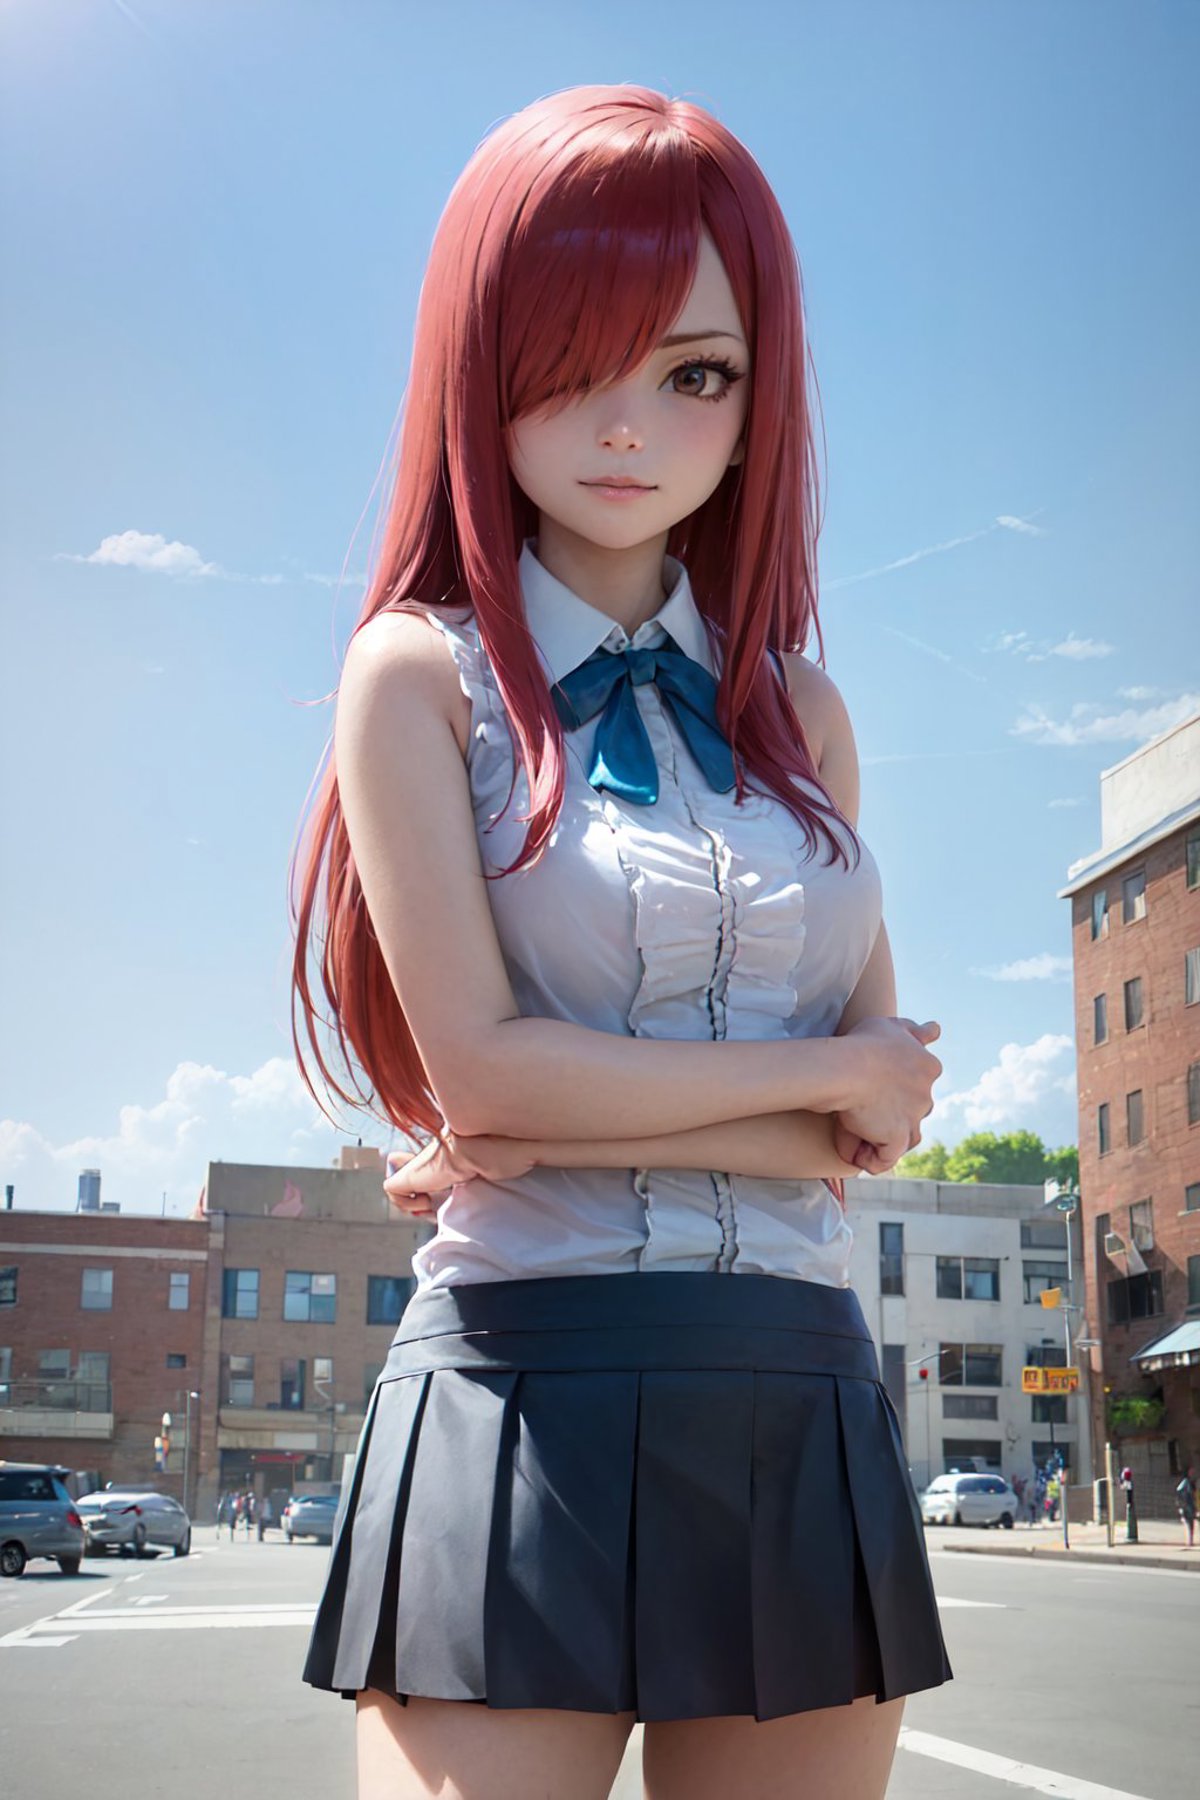 Erza Scarlet | Fairy Tail image by justTNP